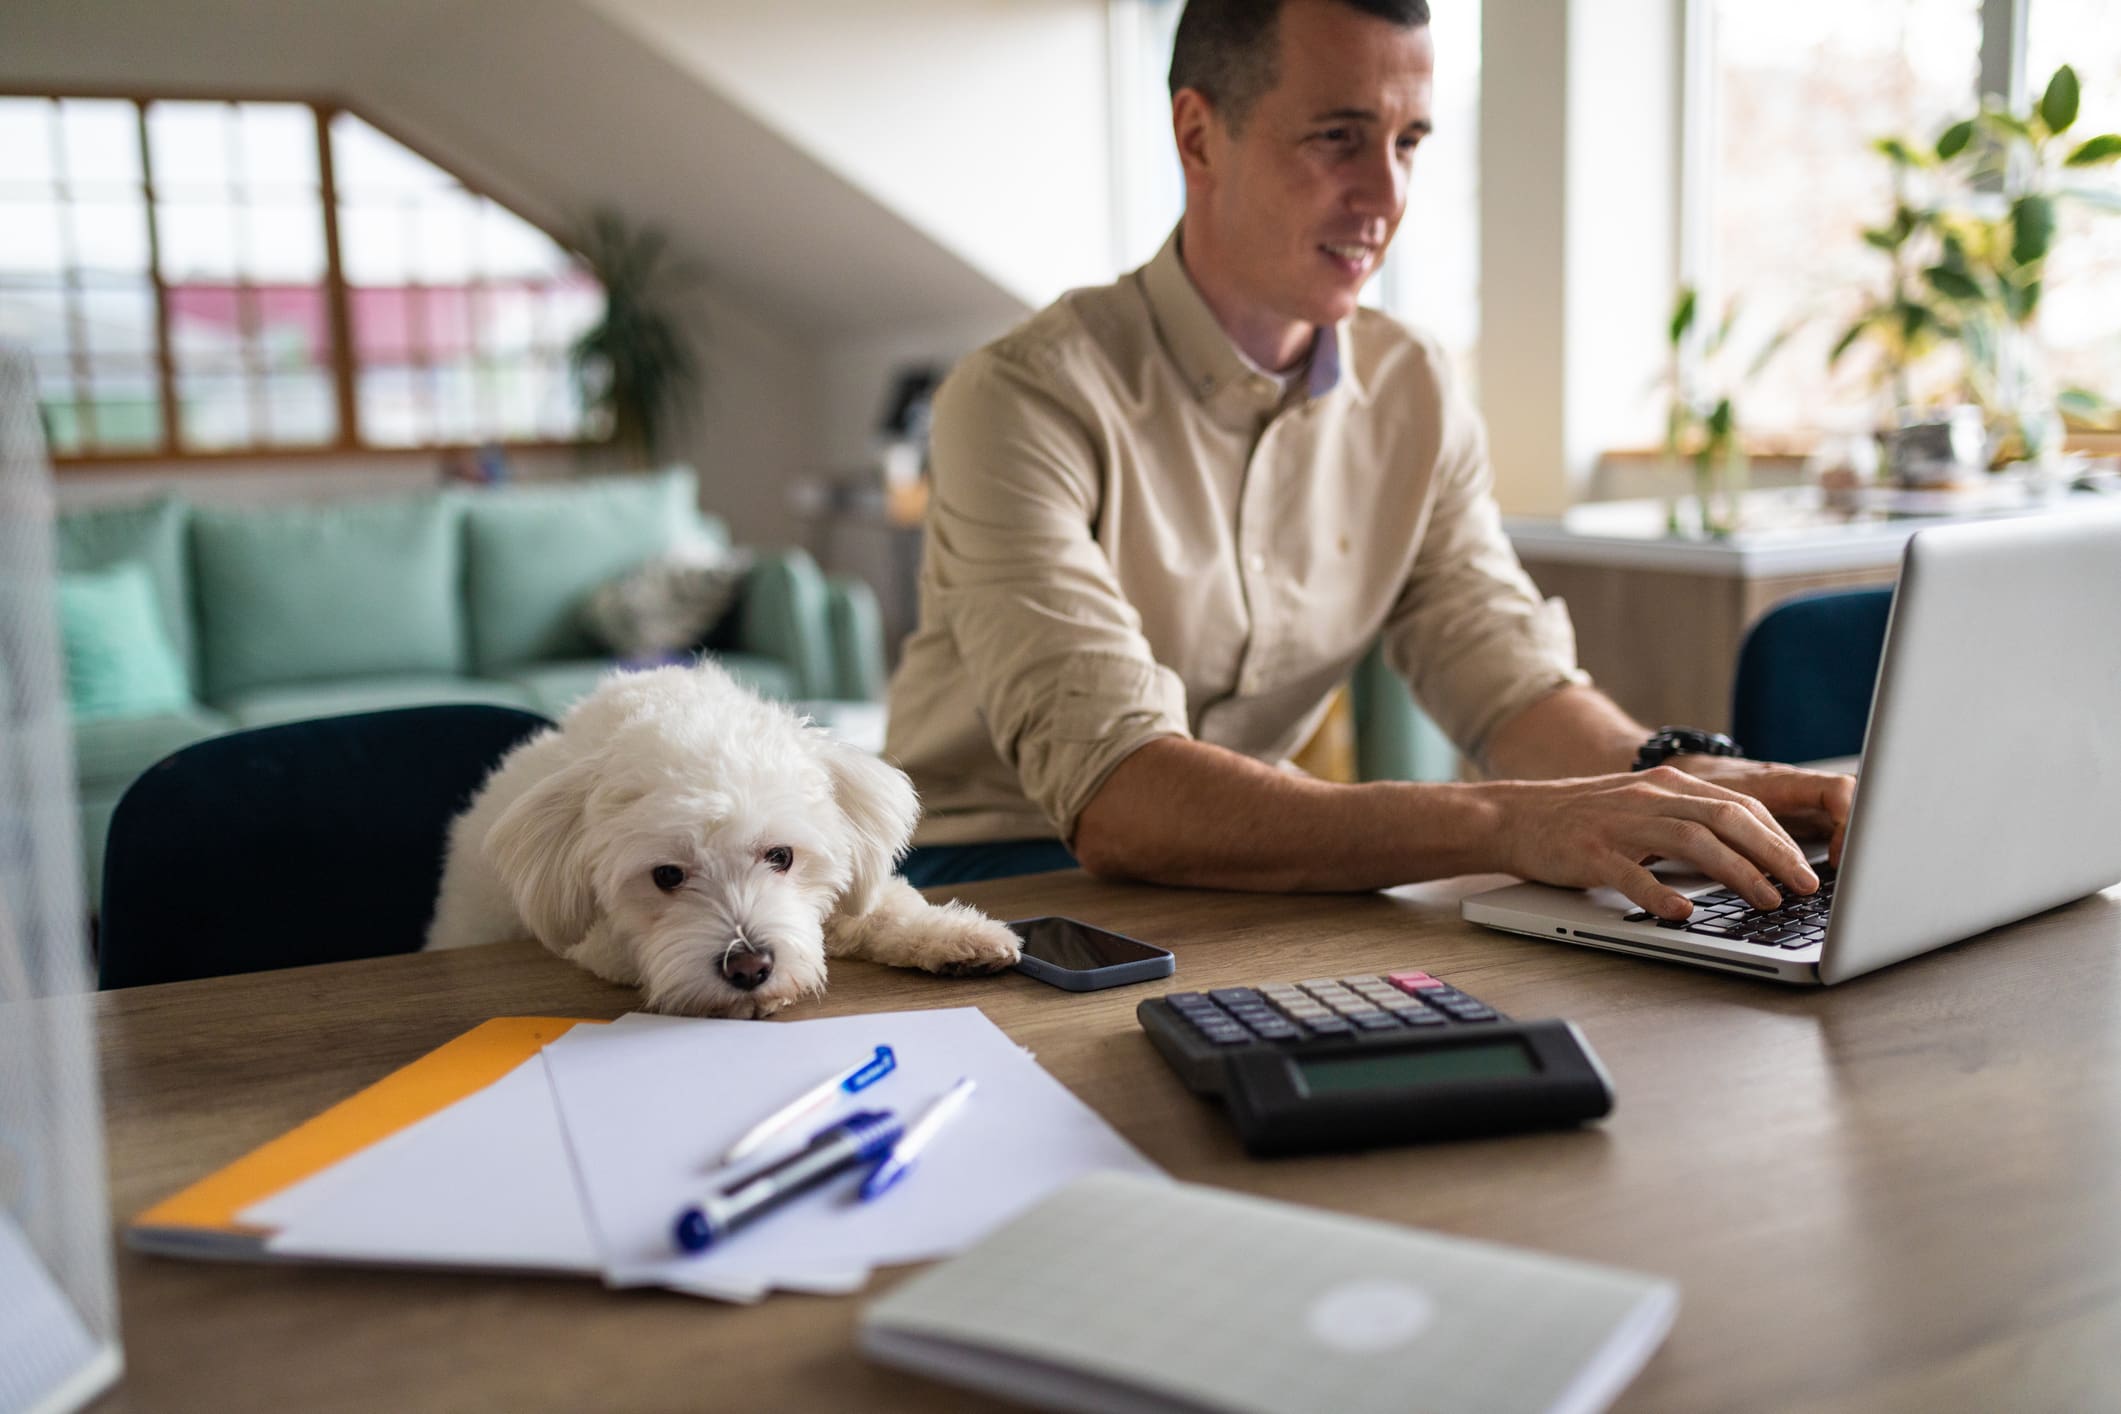 Man looking at computer with dog sitting next to him